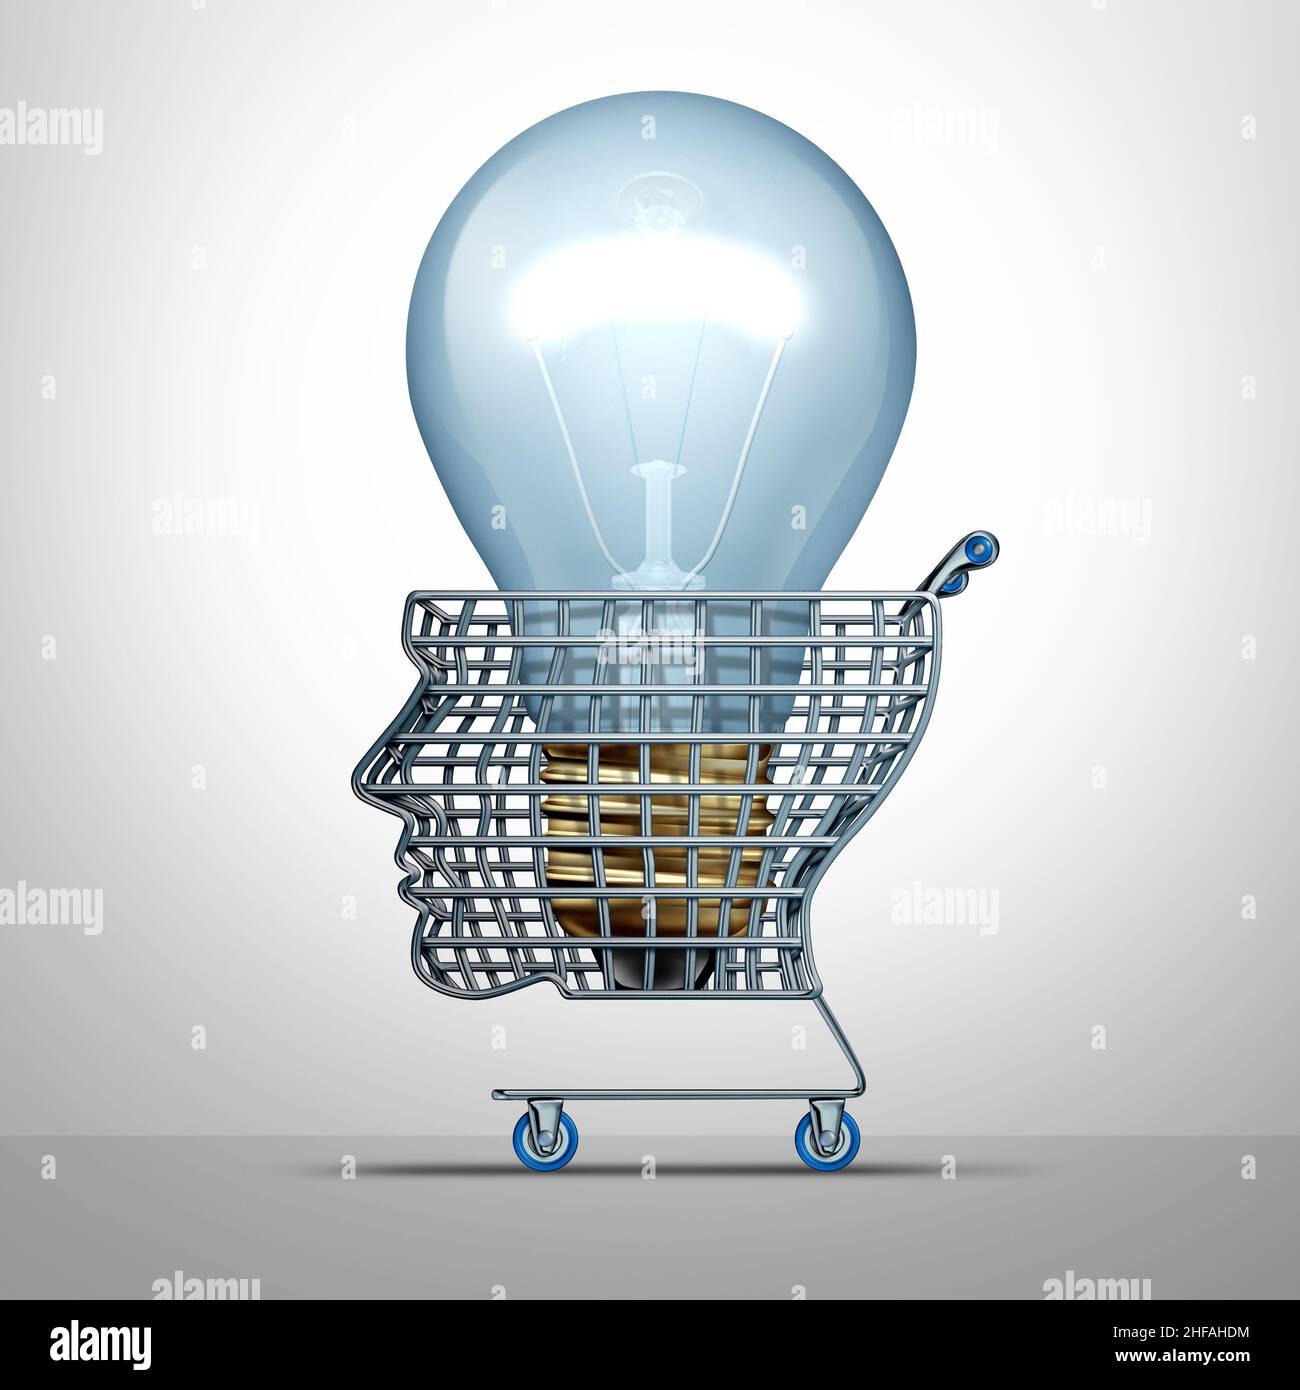 Intelligent shopper and smart shopping and thinking consumer or customer feedback and buyer ideas concept for spending money wisely. Stock Photo